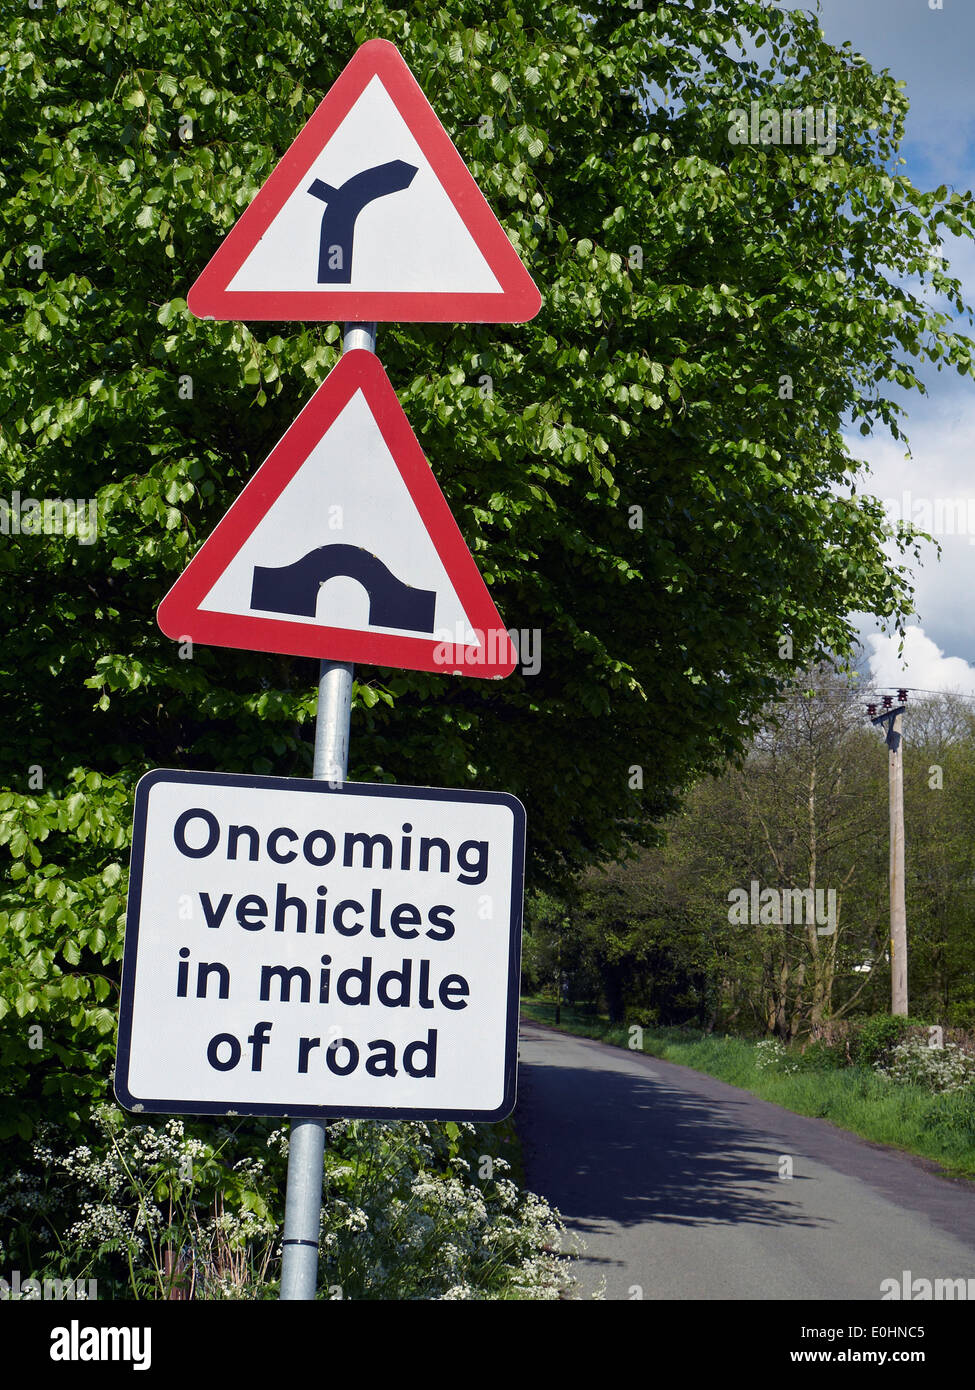 Road narrows sign Oncoming vehicles in middle of road in Cheshire UK Stock Photo